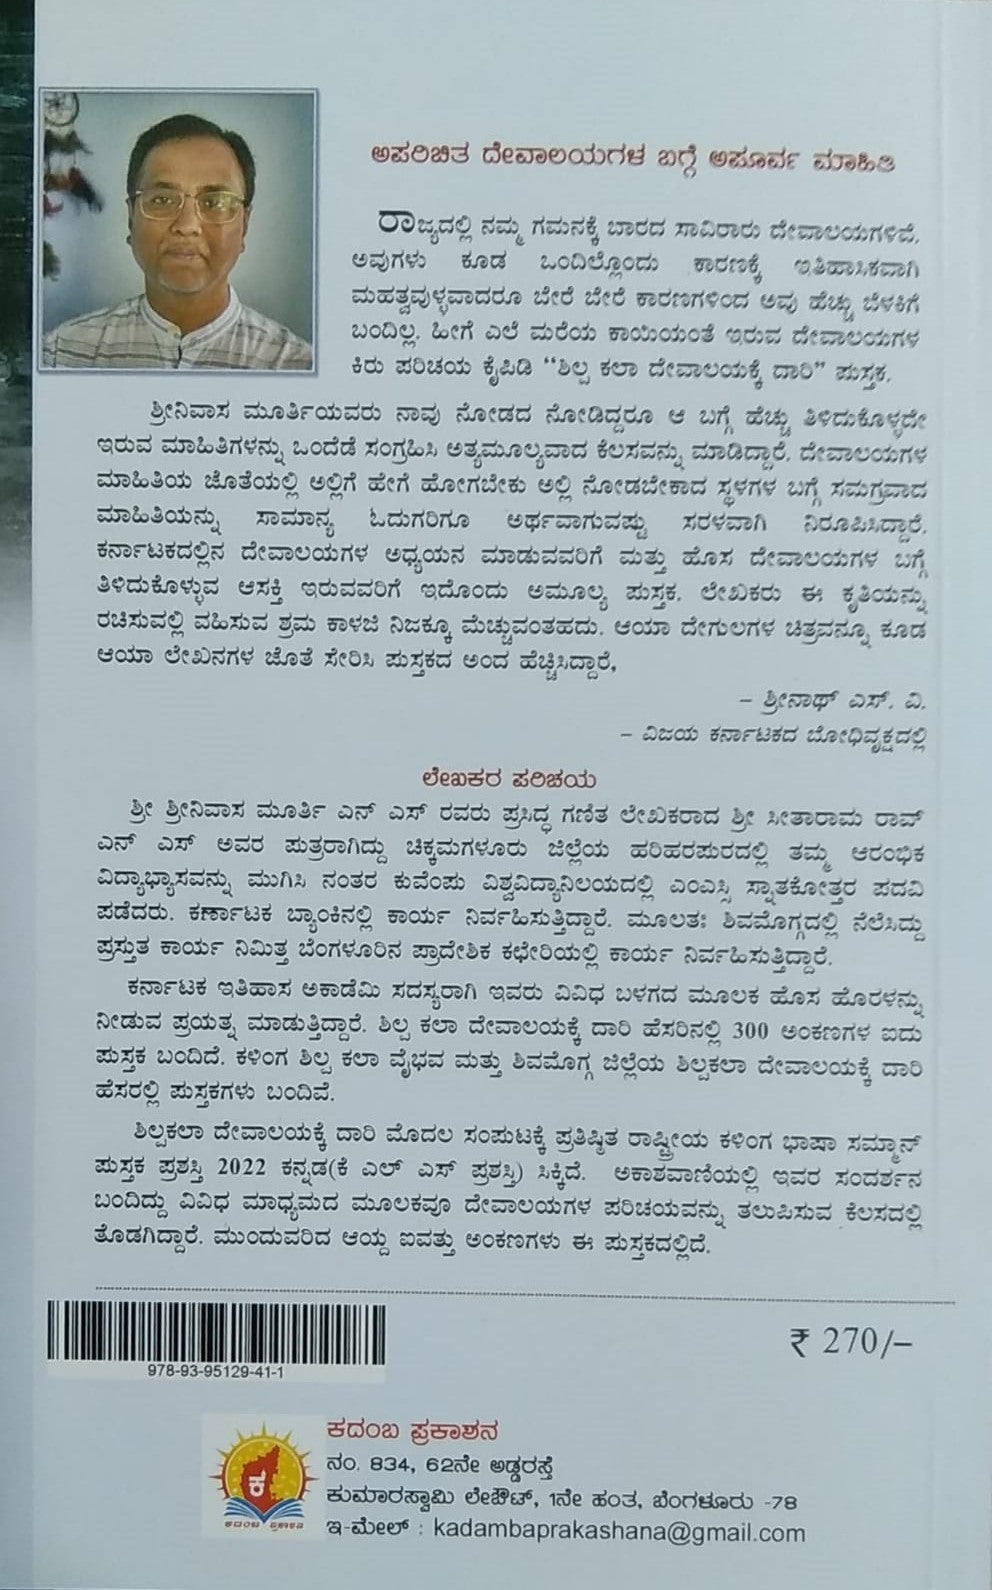 Shilpakala Devalaykke Daare-6 ia a History in the Architecture Oriented Introduction to Old Monuments, Written by Shreenivasamurthy, Published by Kadamba Prakashana